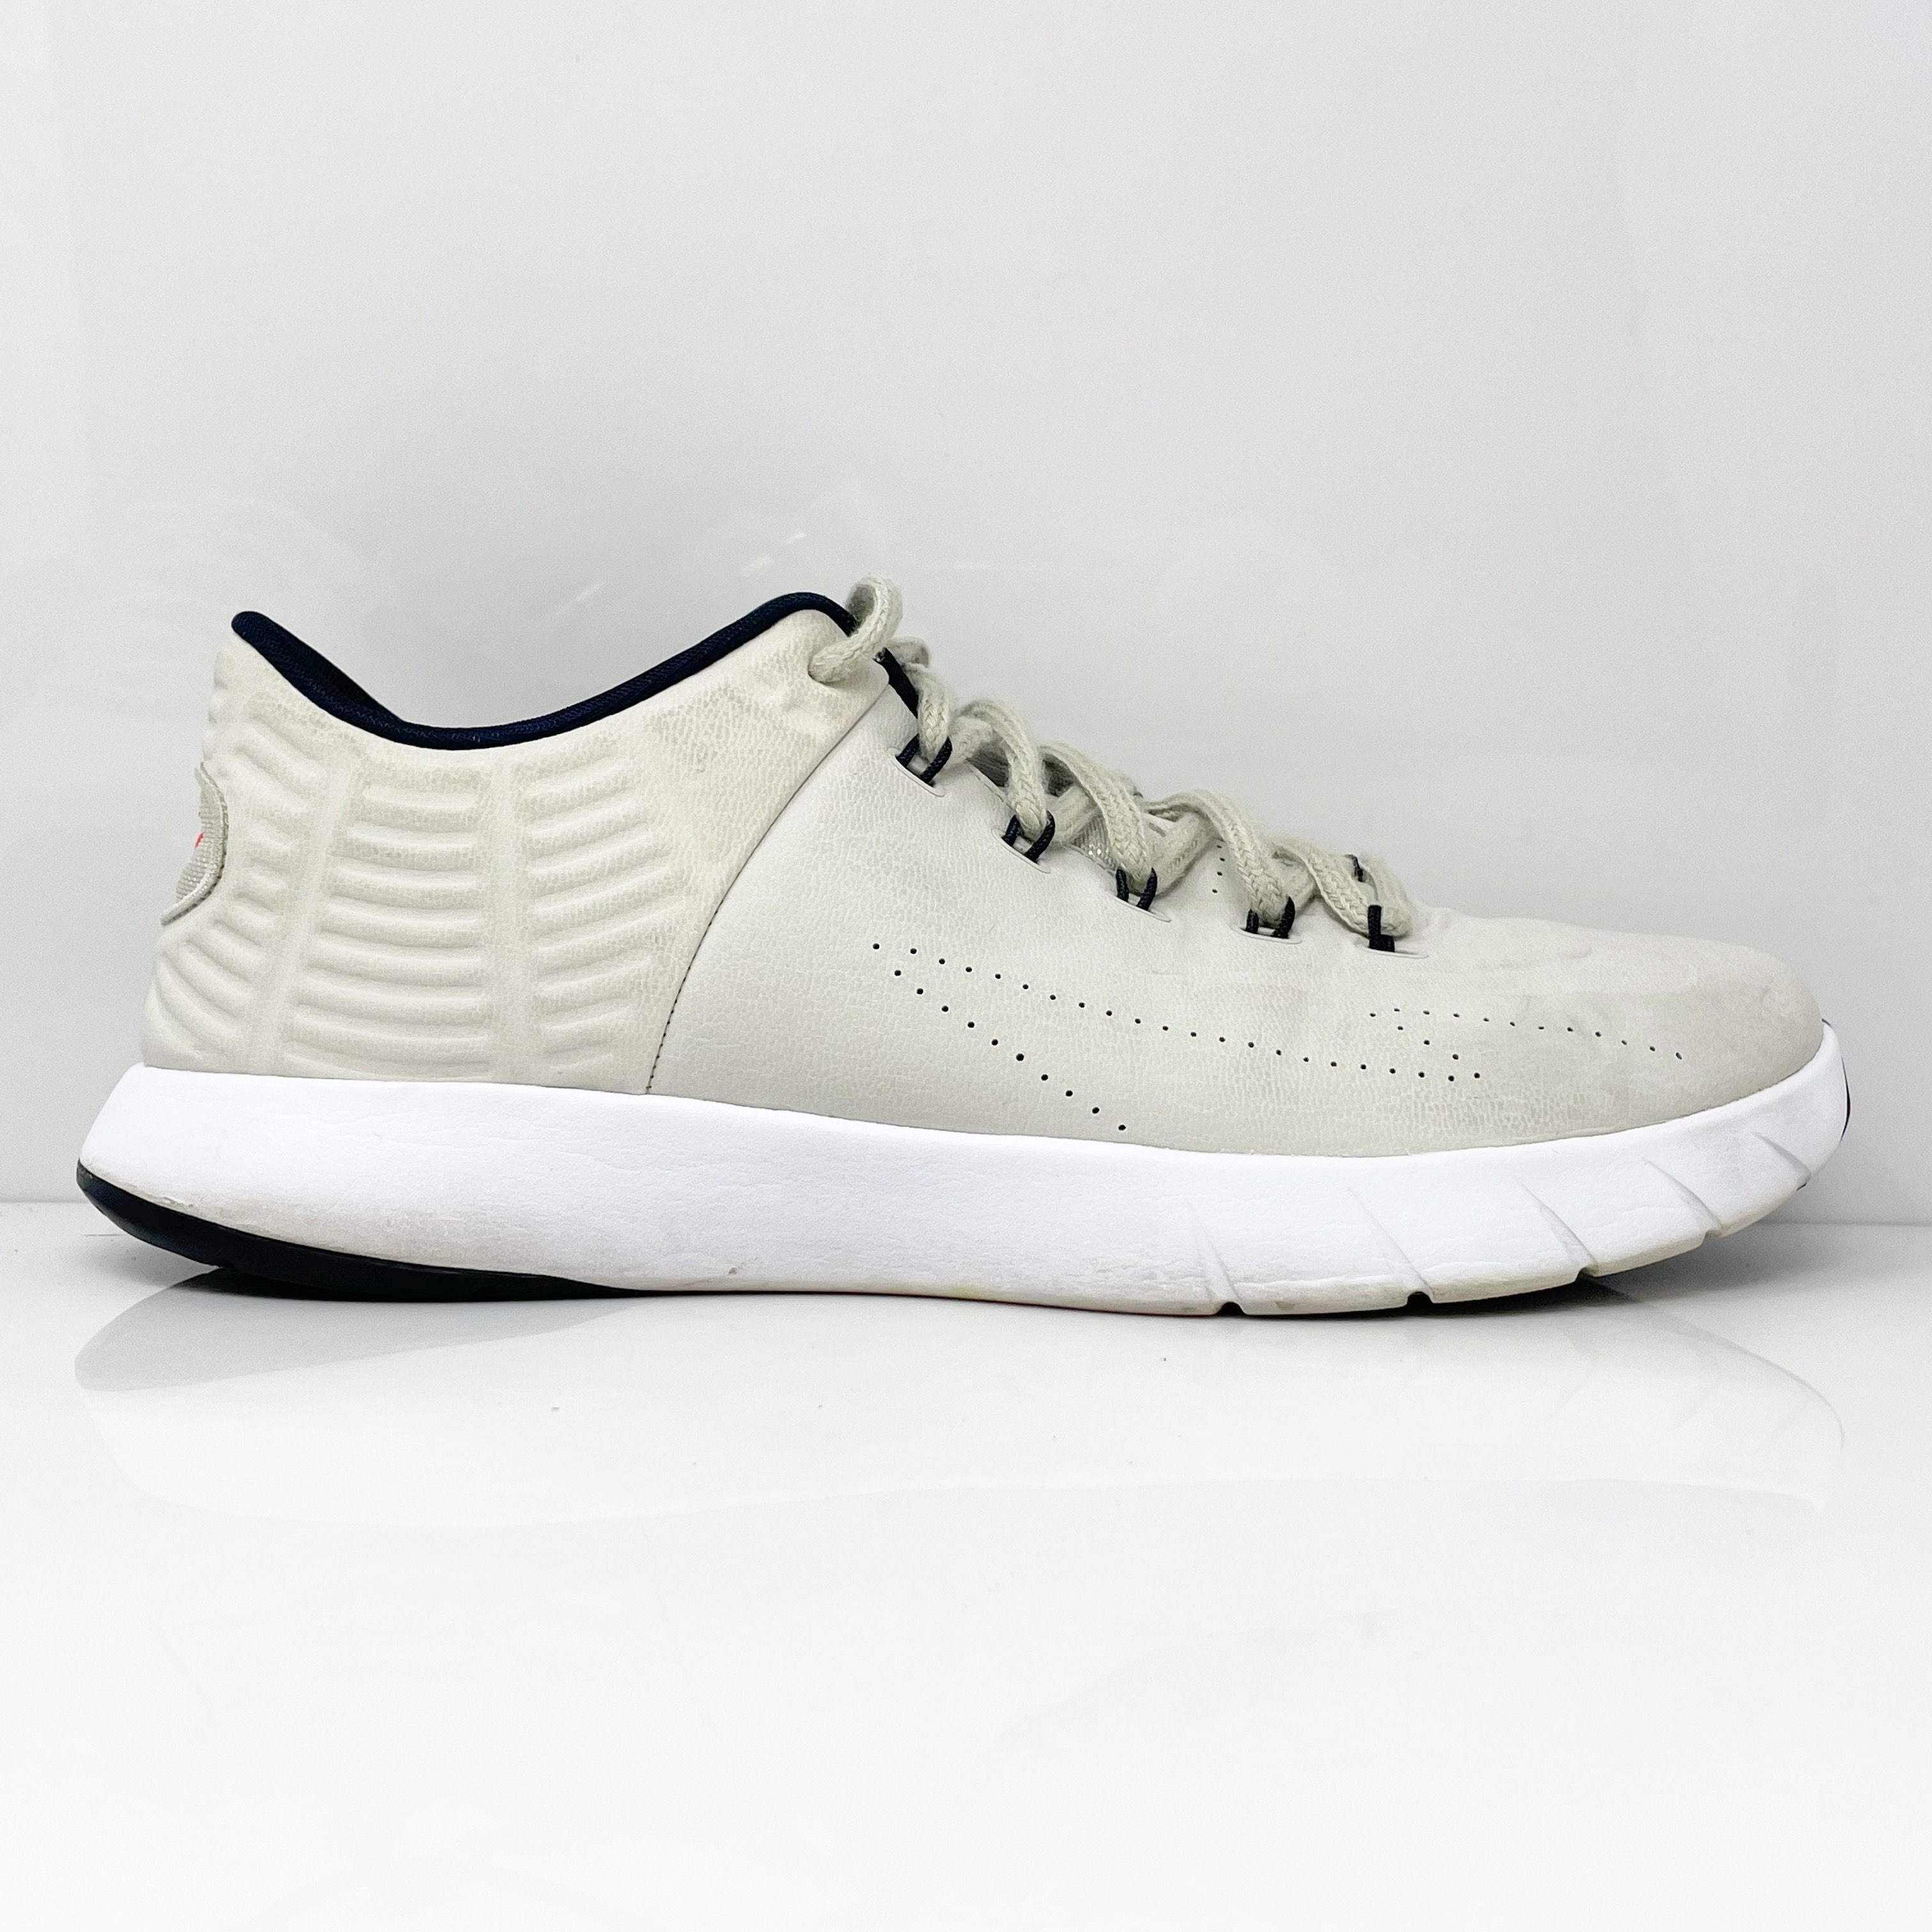 Nike Mens Lunar HyperRev Low EXT 802557-003 White Casual Shoes Sneaker–